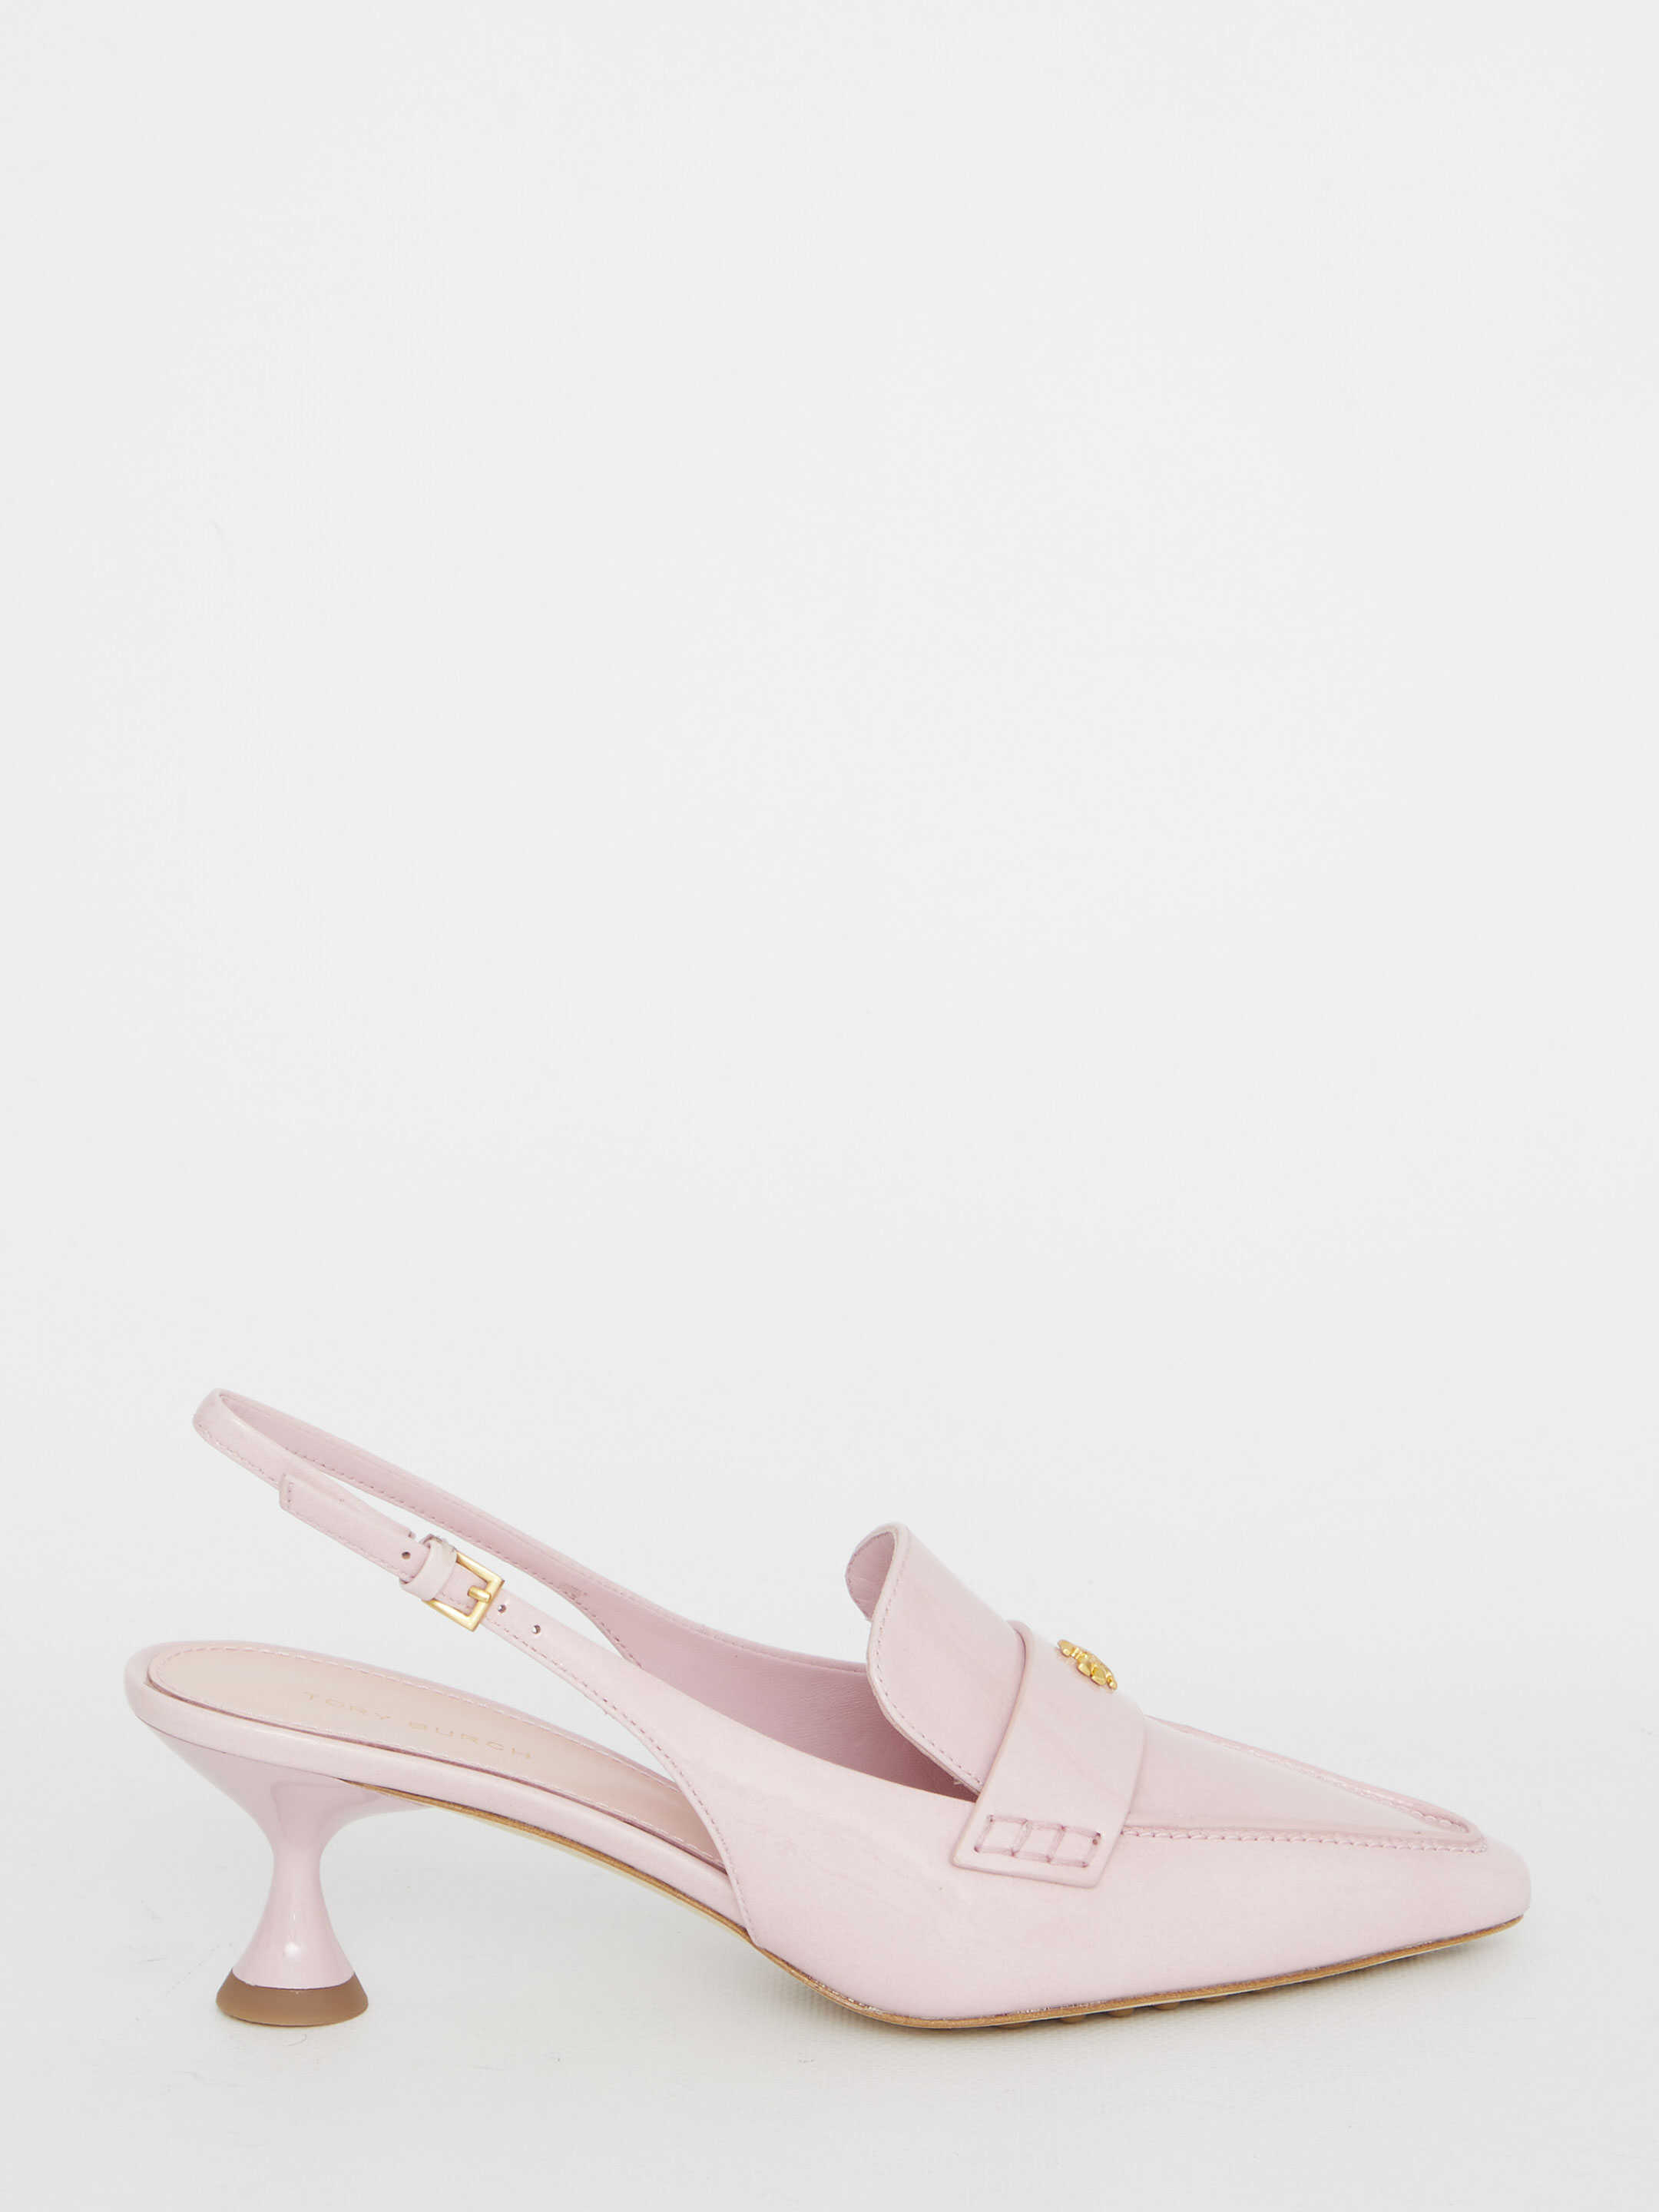 Tory Burch Delicate Logo Slingback Sandals Pink